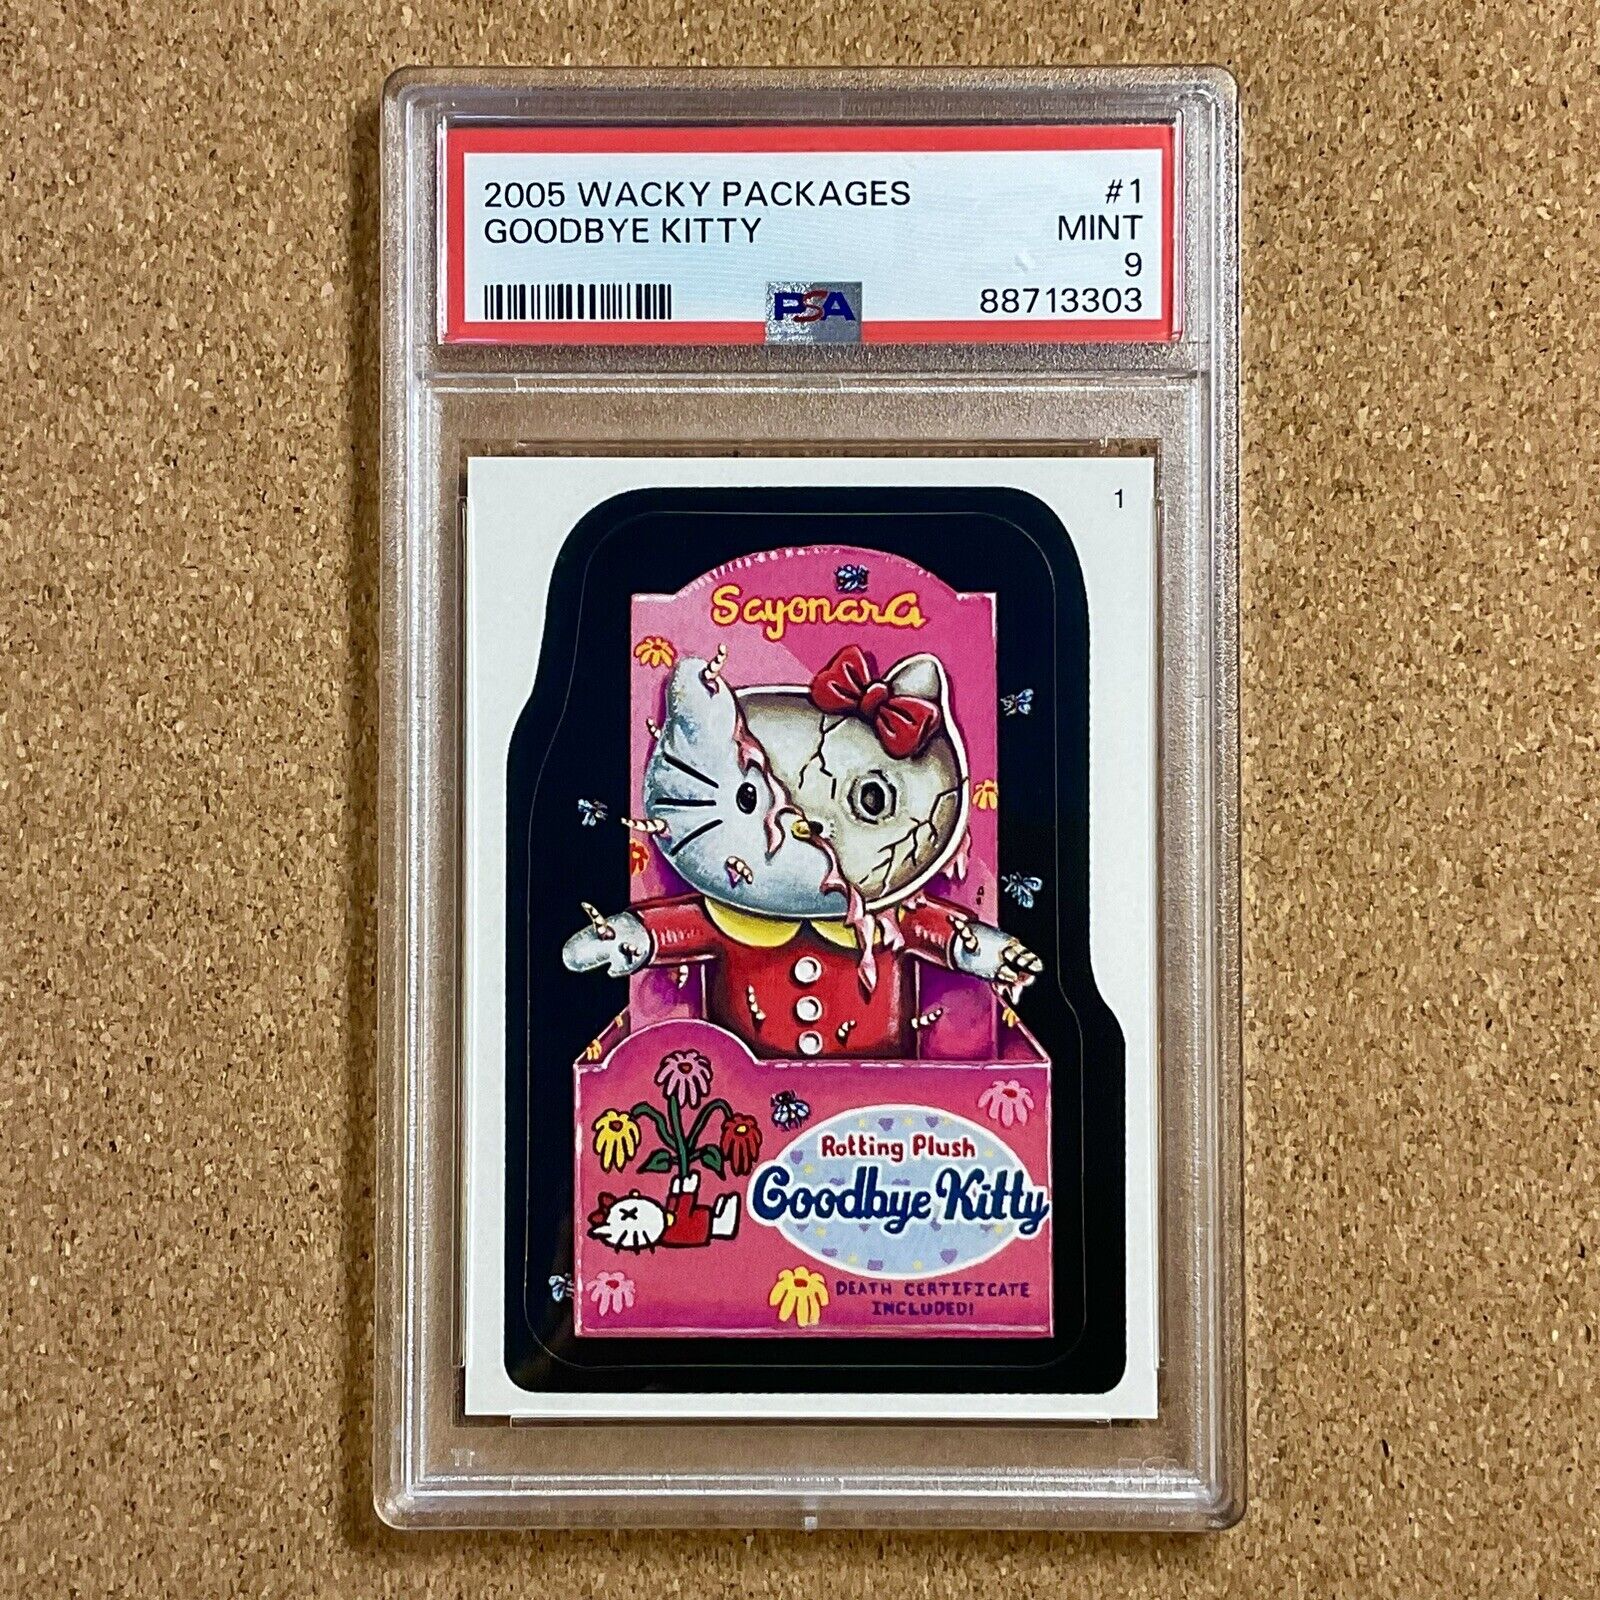 GOODBYE KITTY #1 2005 Wacky Packages Hello Kitty Spoof Card PSA 9 MINT